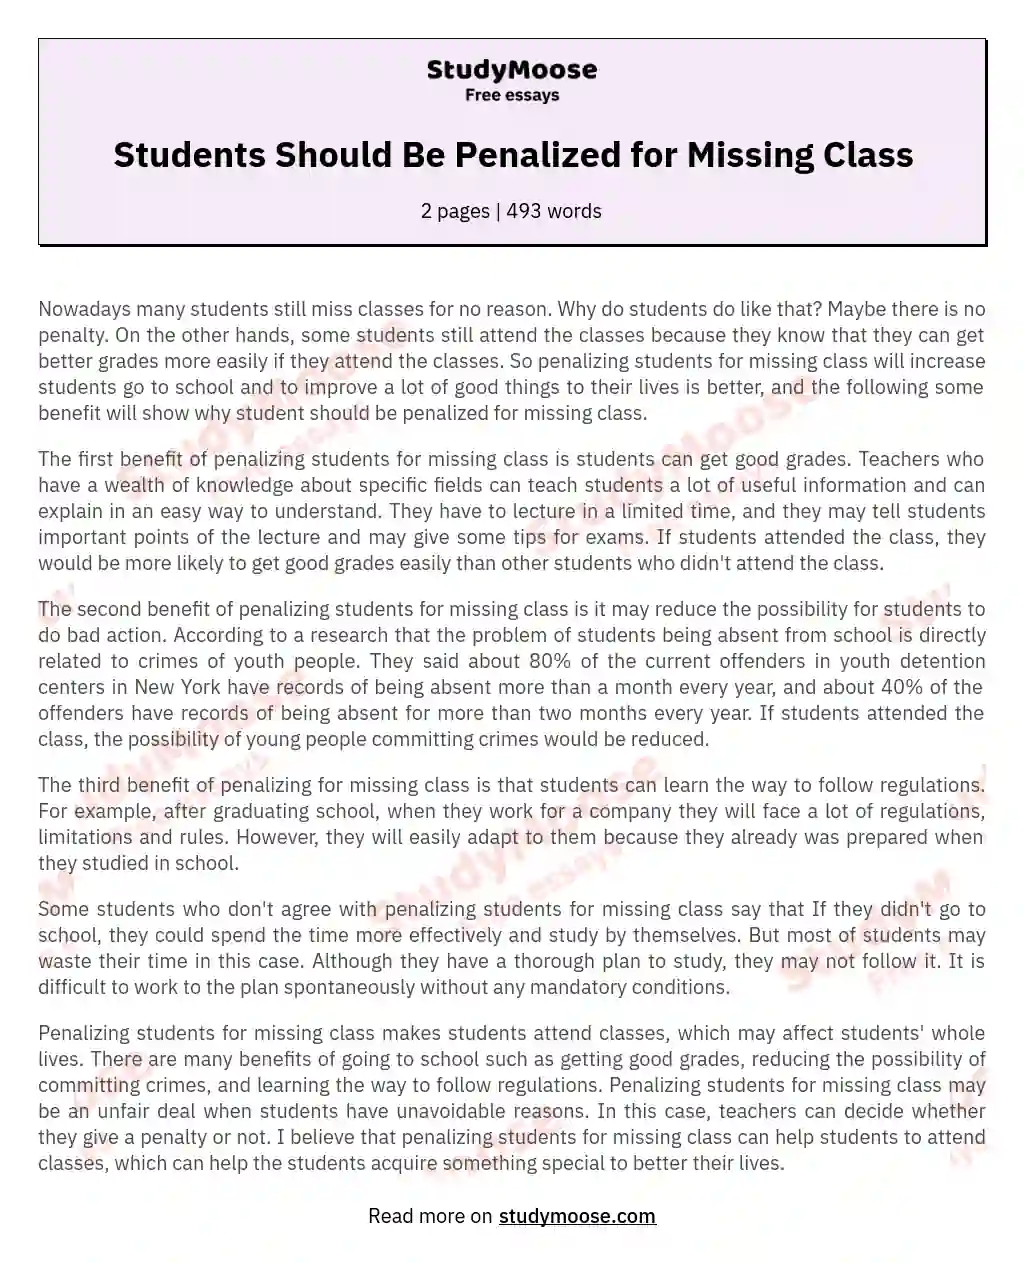 Students Should Be Penalized for Missing Class